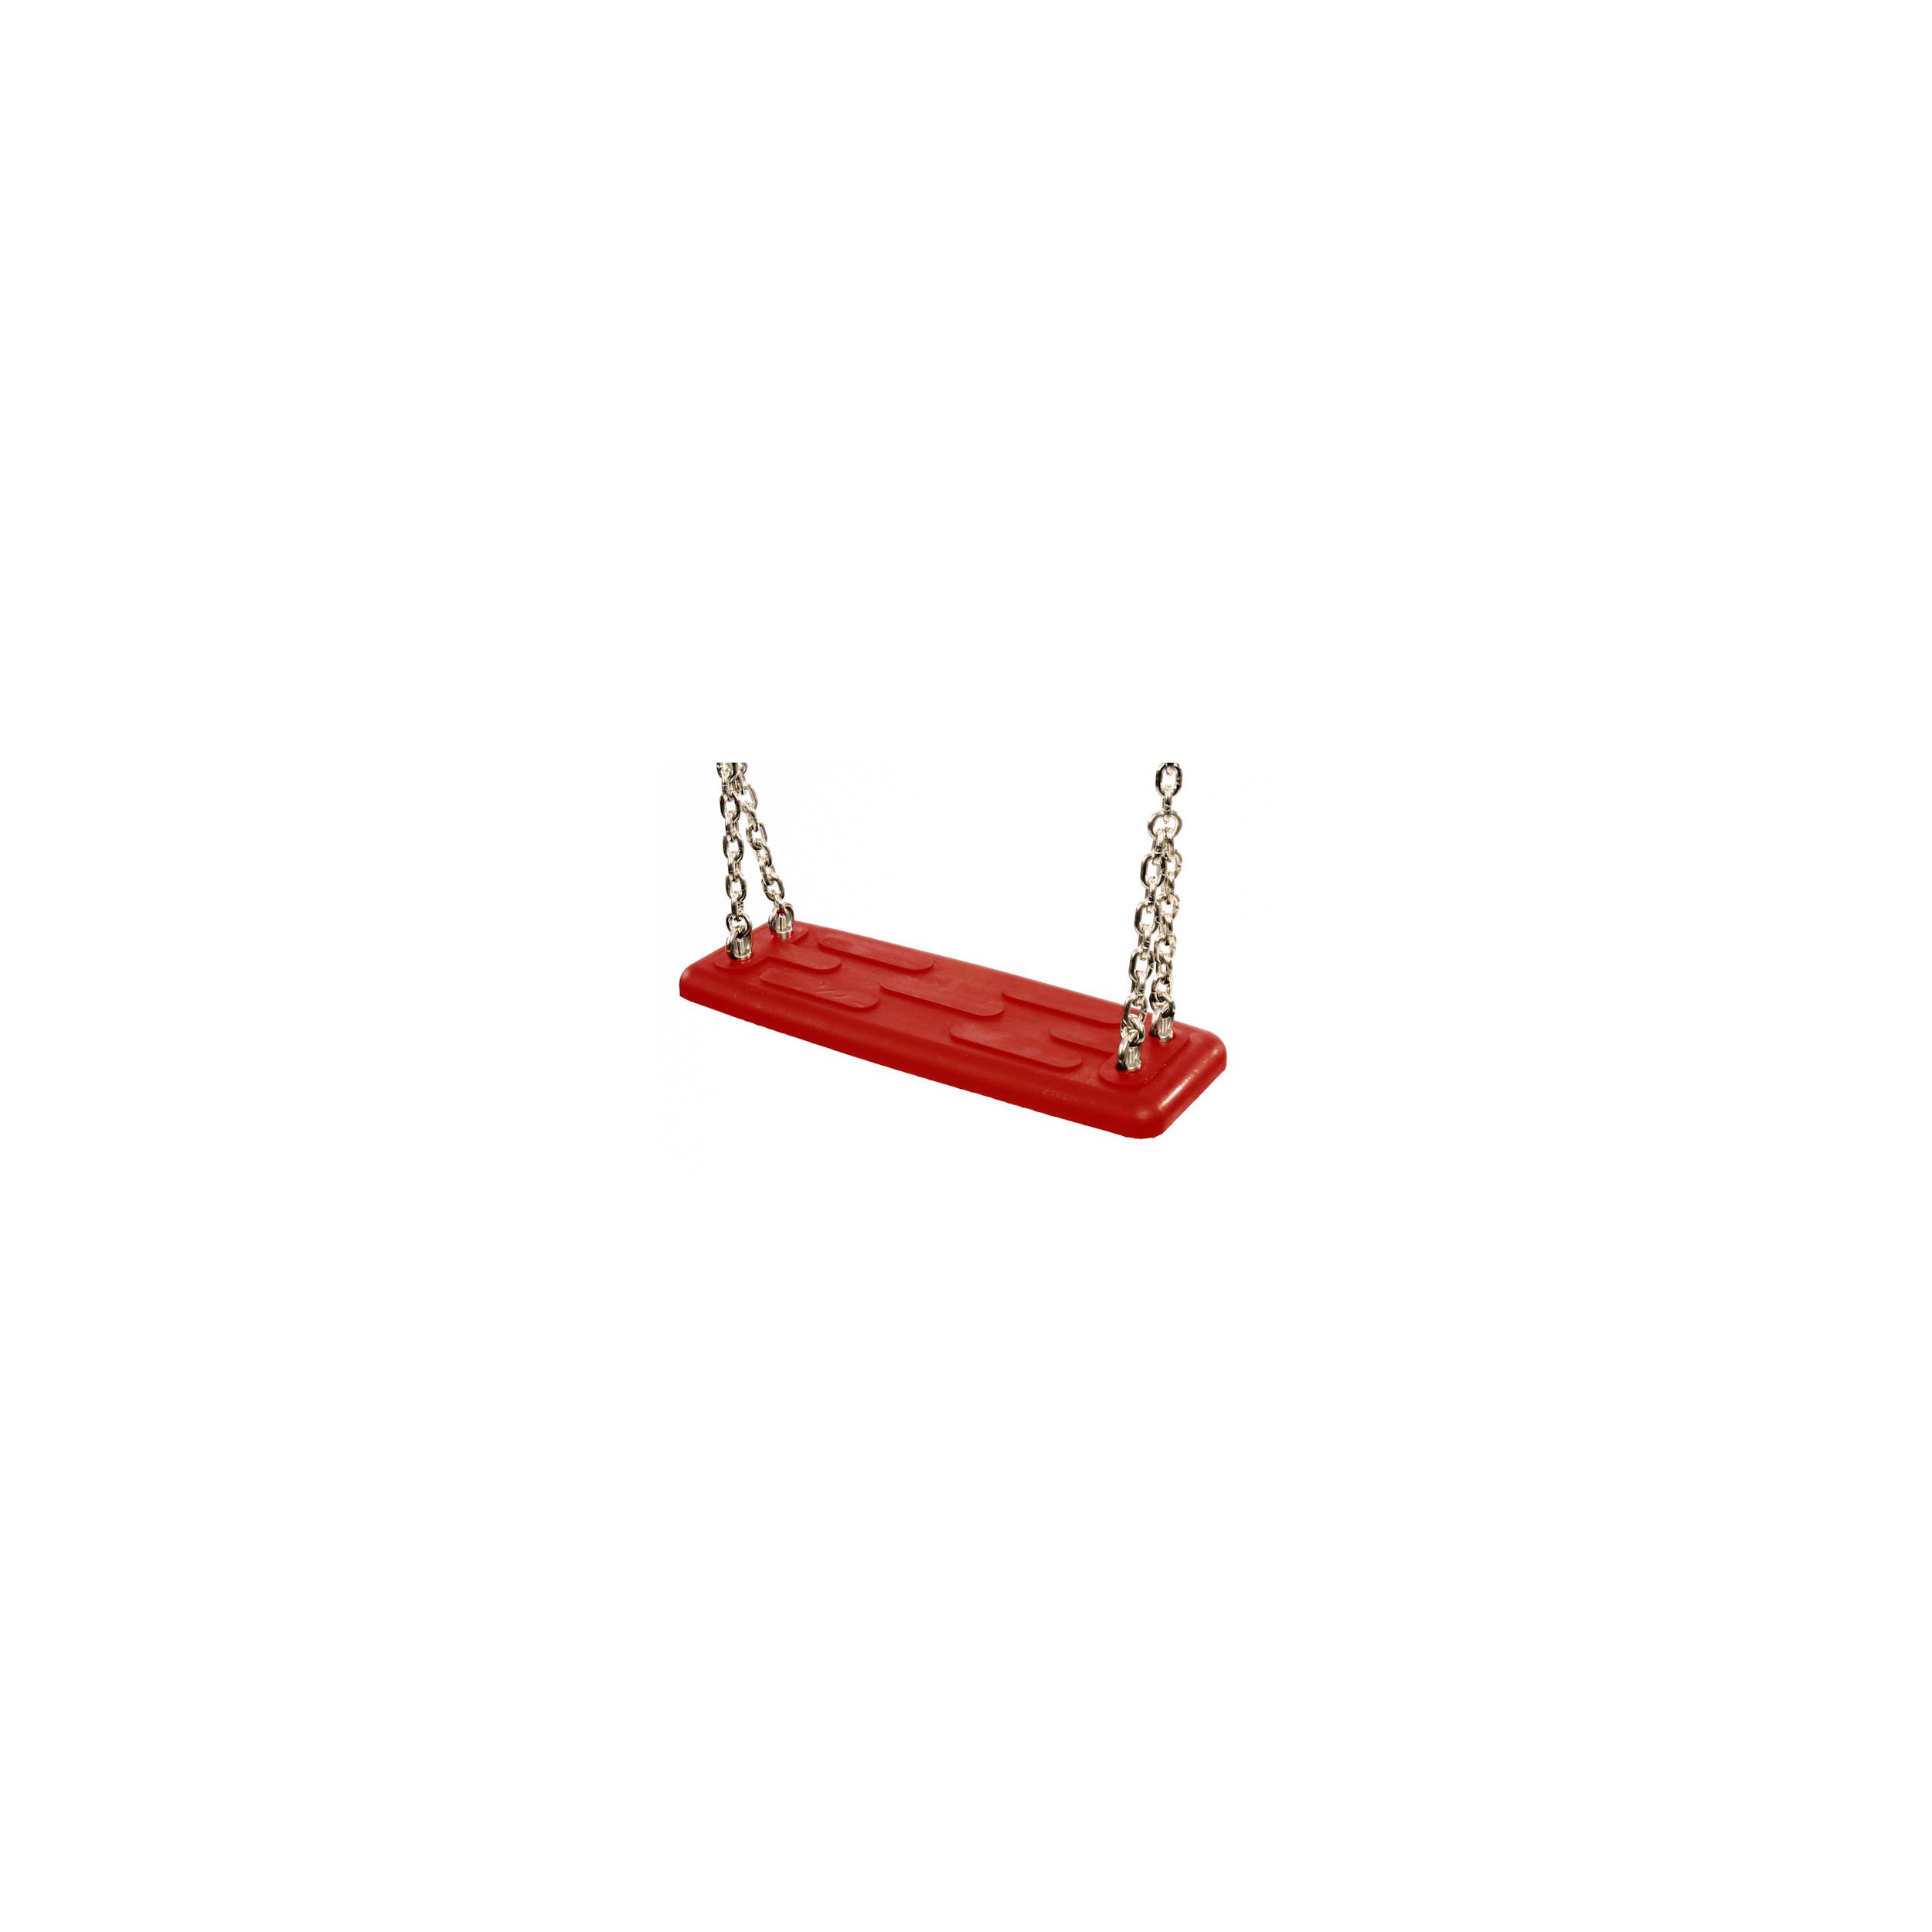 Commercial safety rubber swing seat type 1A red stainless steel AISI 316 250 cm